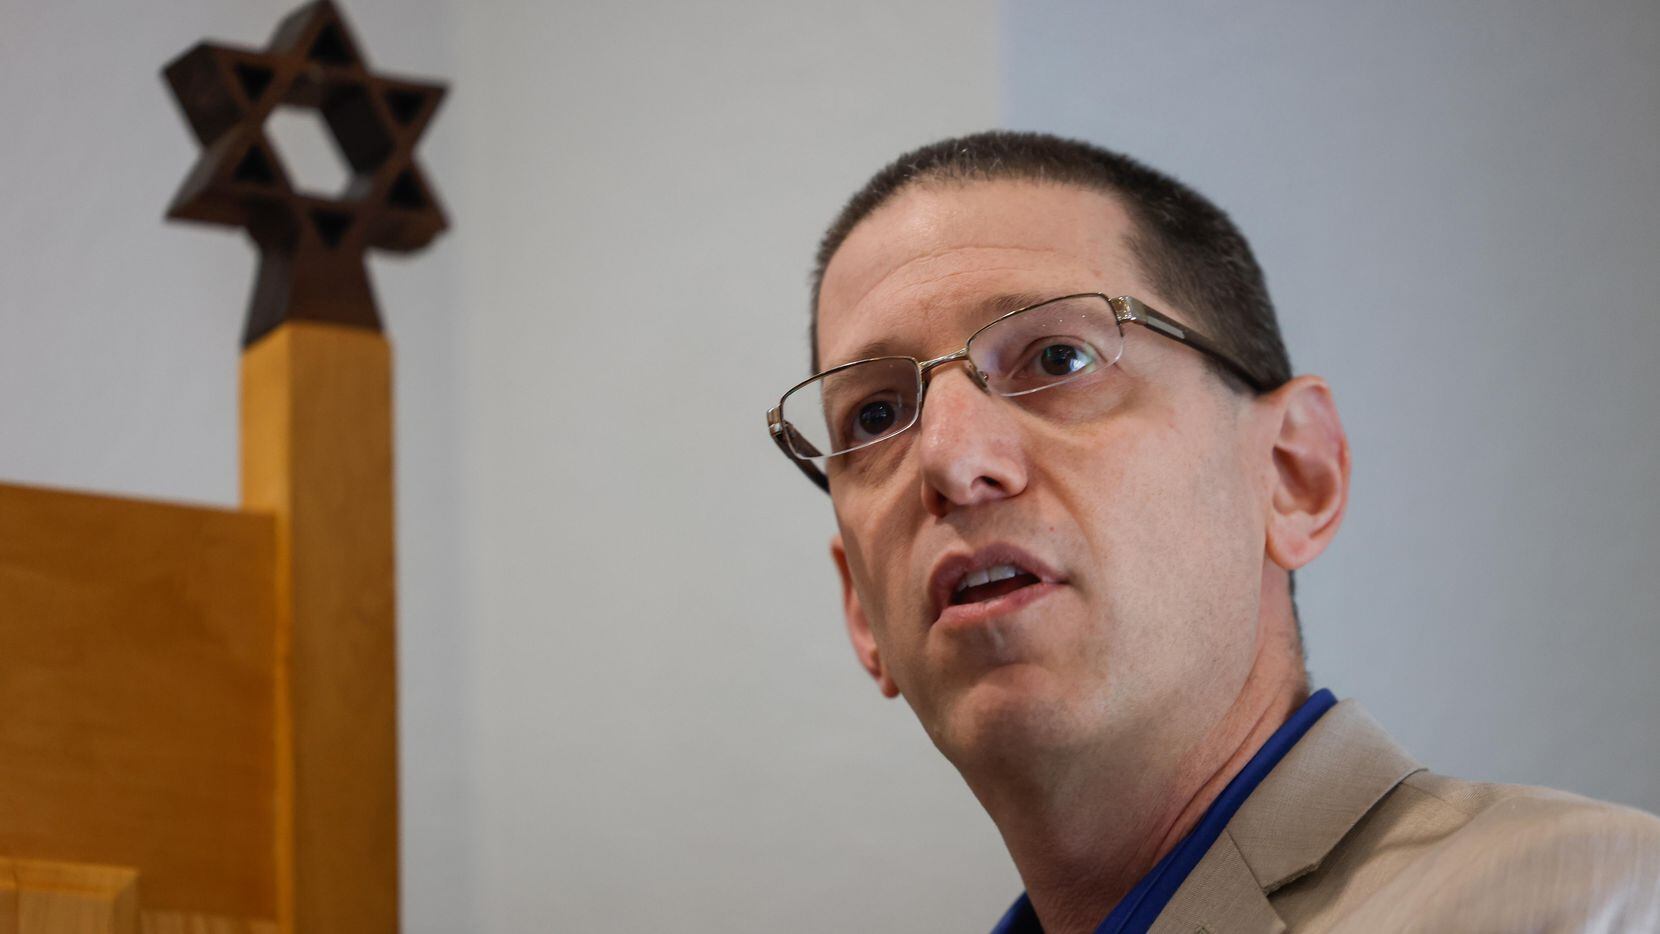 Rabbi Charlie Cytron-Walker during a press conference at the Congregation Beth Israel in...